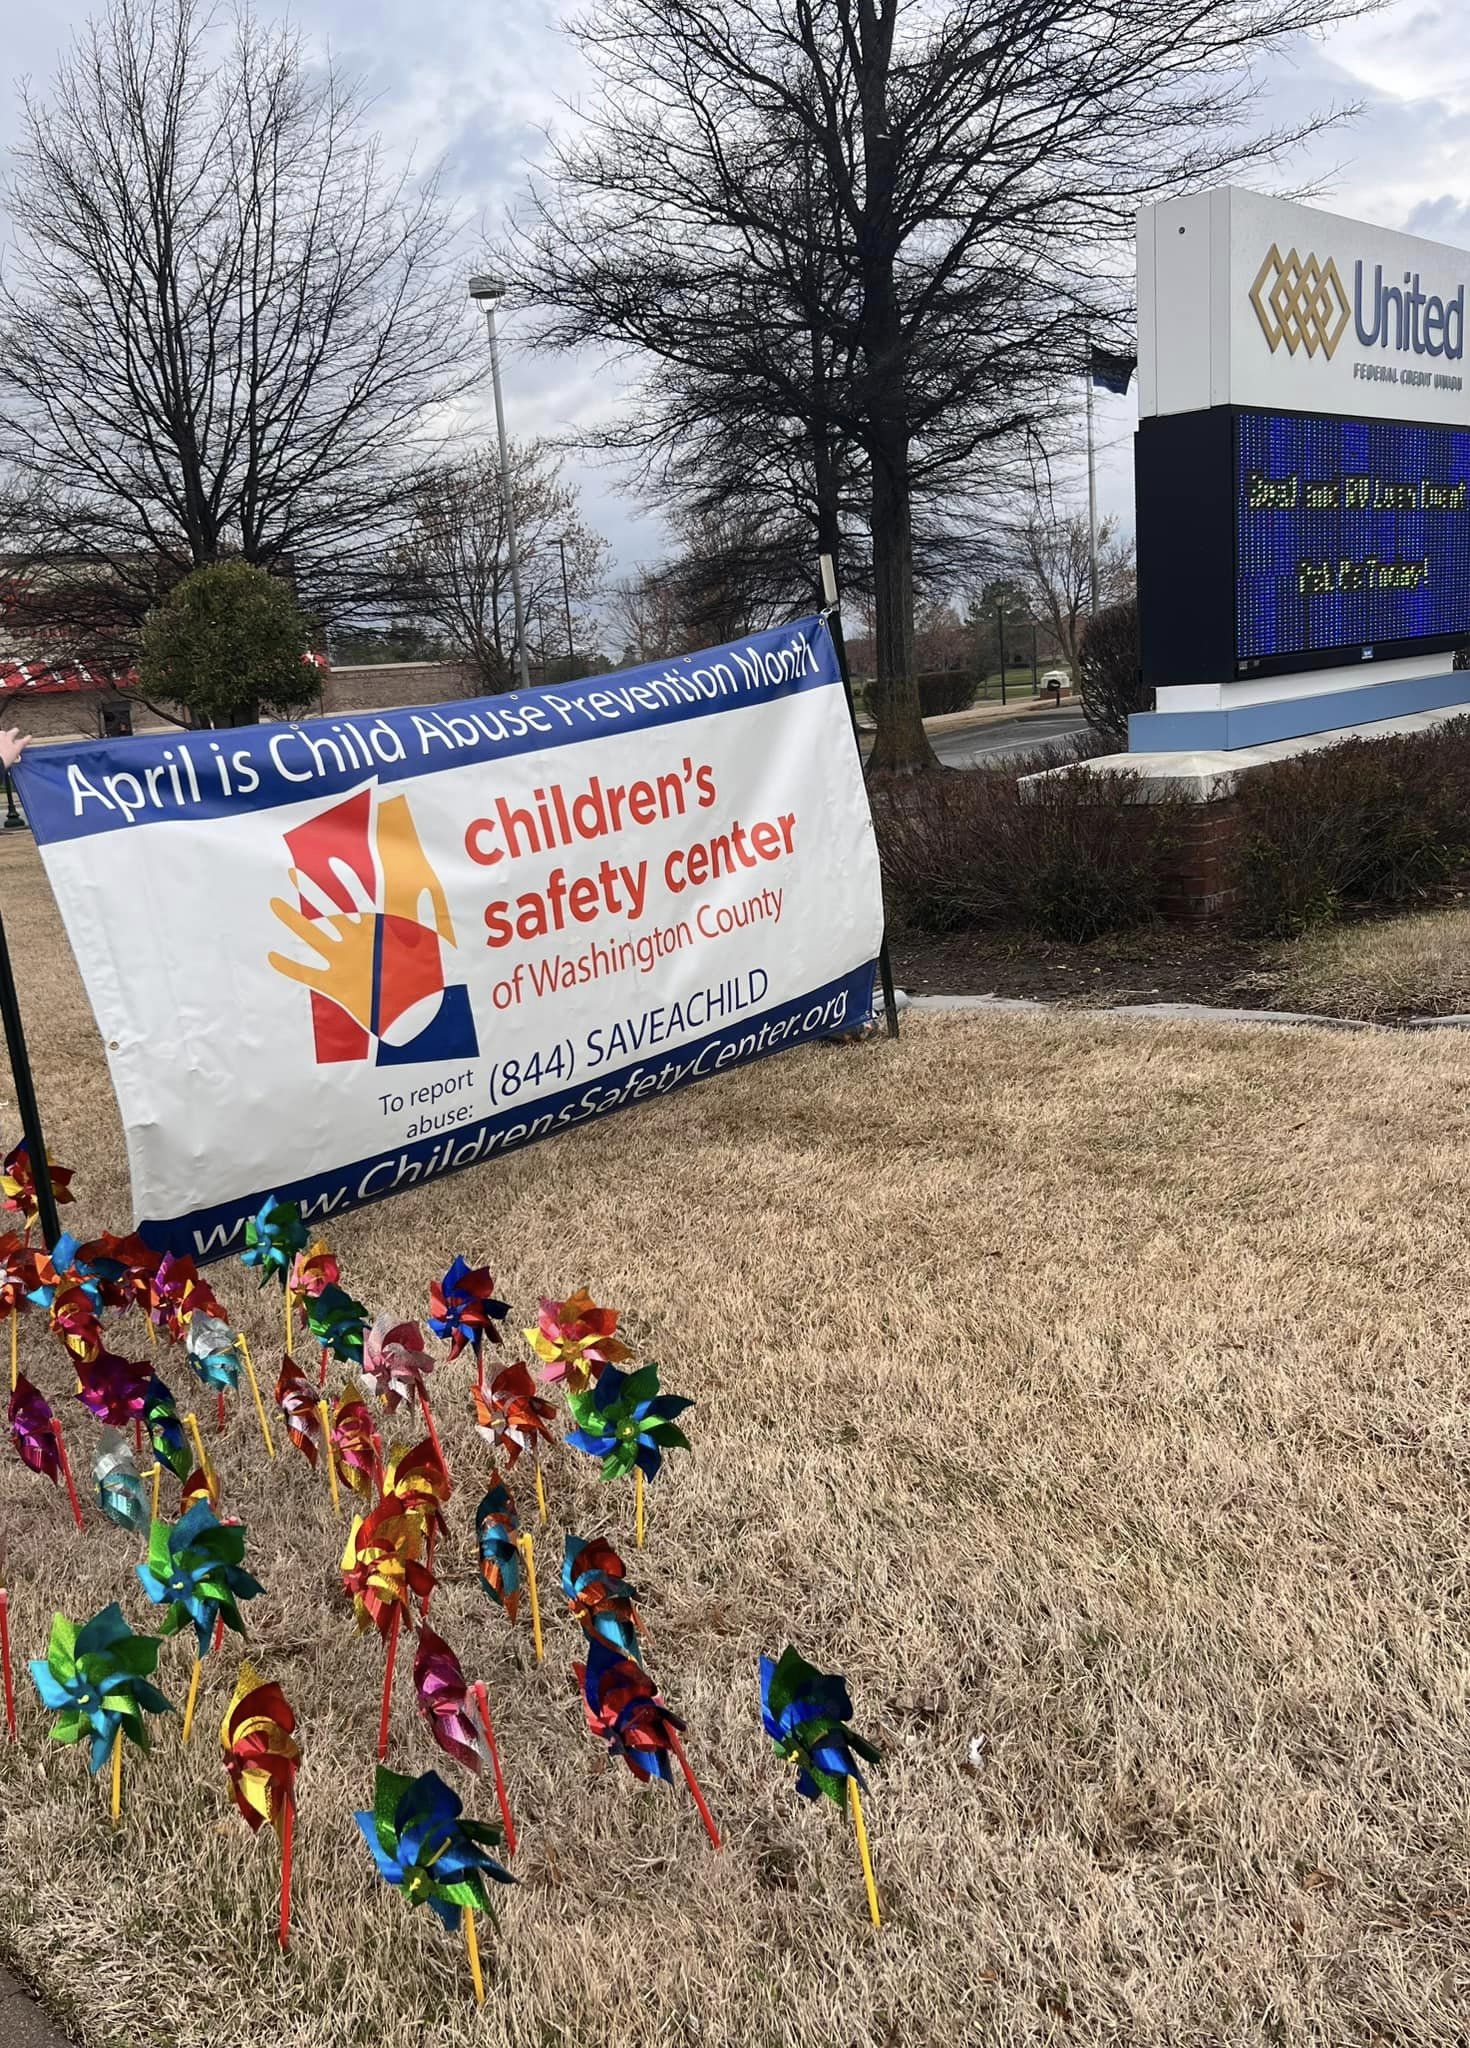 The Children’s Safety Center of Washington County celebrates Child Abuse Prevention Month